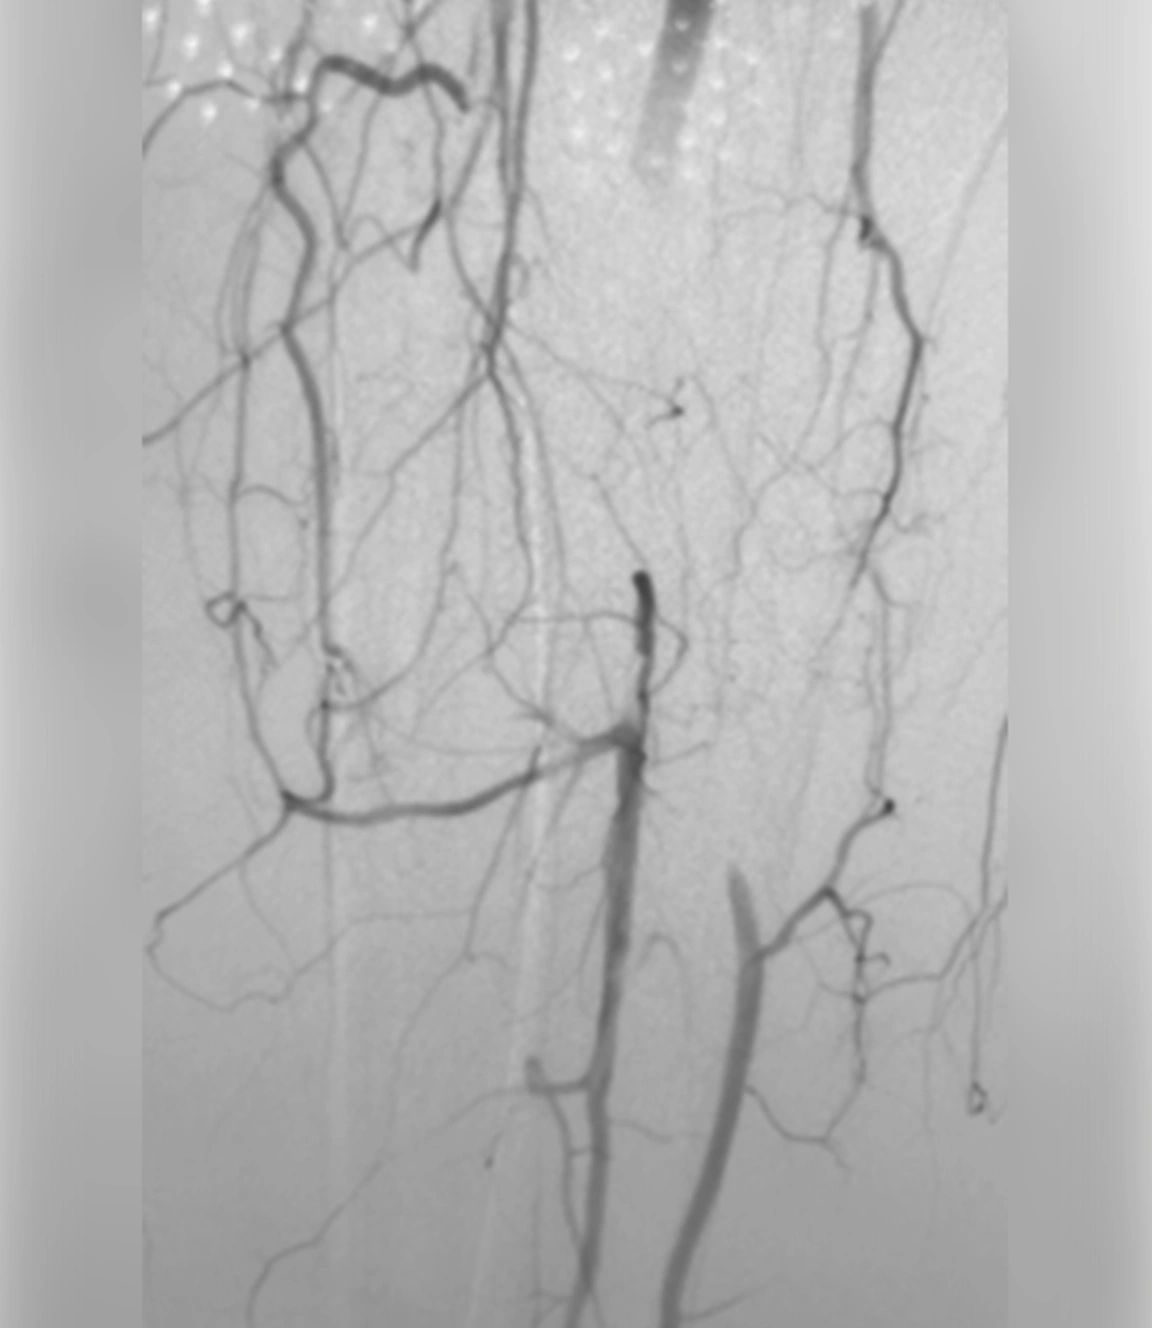 Angiographic image shows occlusion of the tibial artery prior to thrombectomy